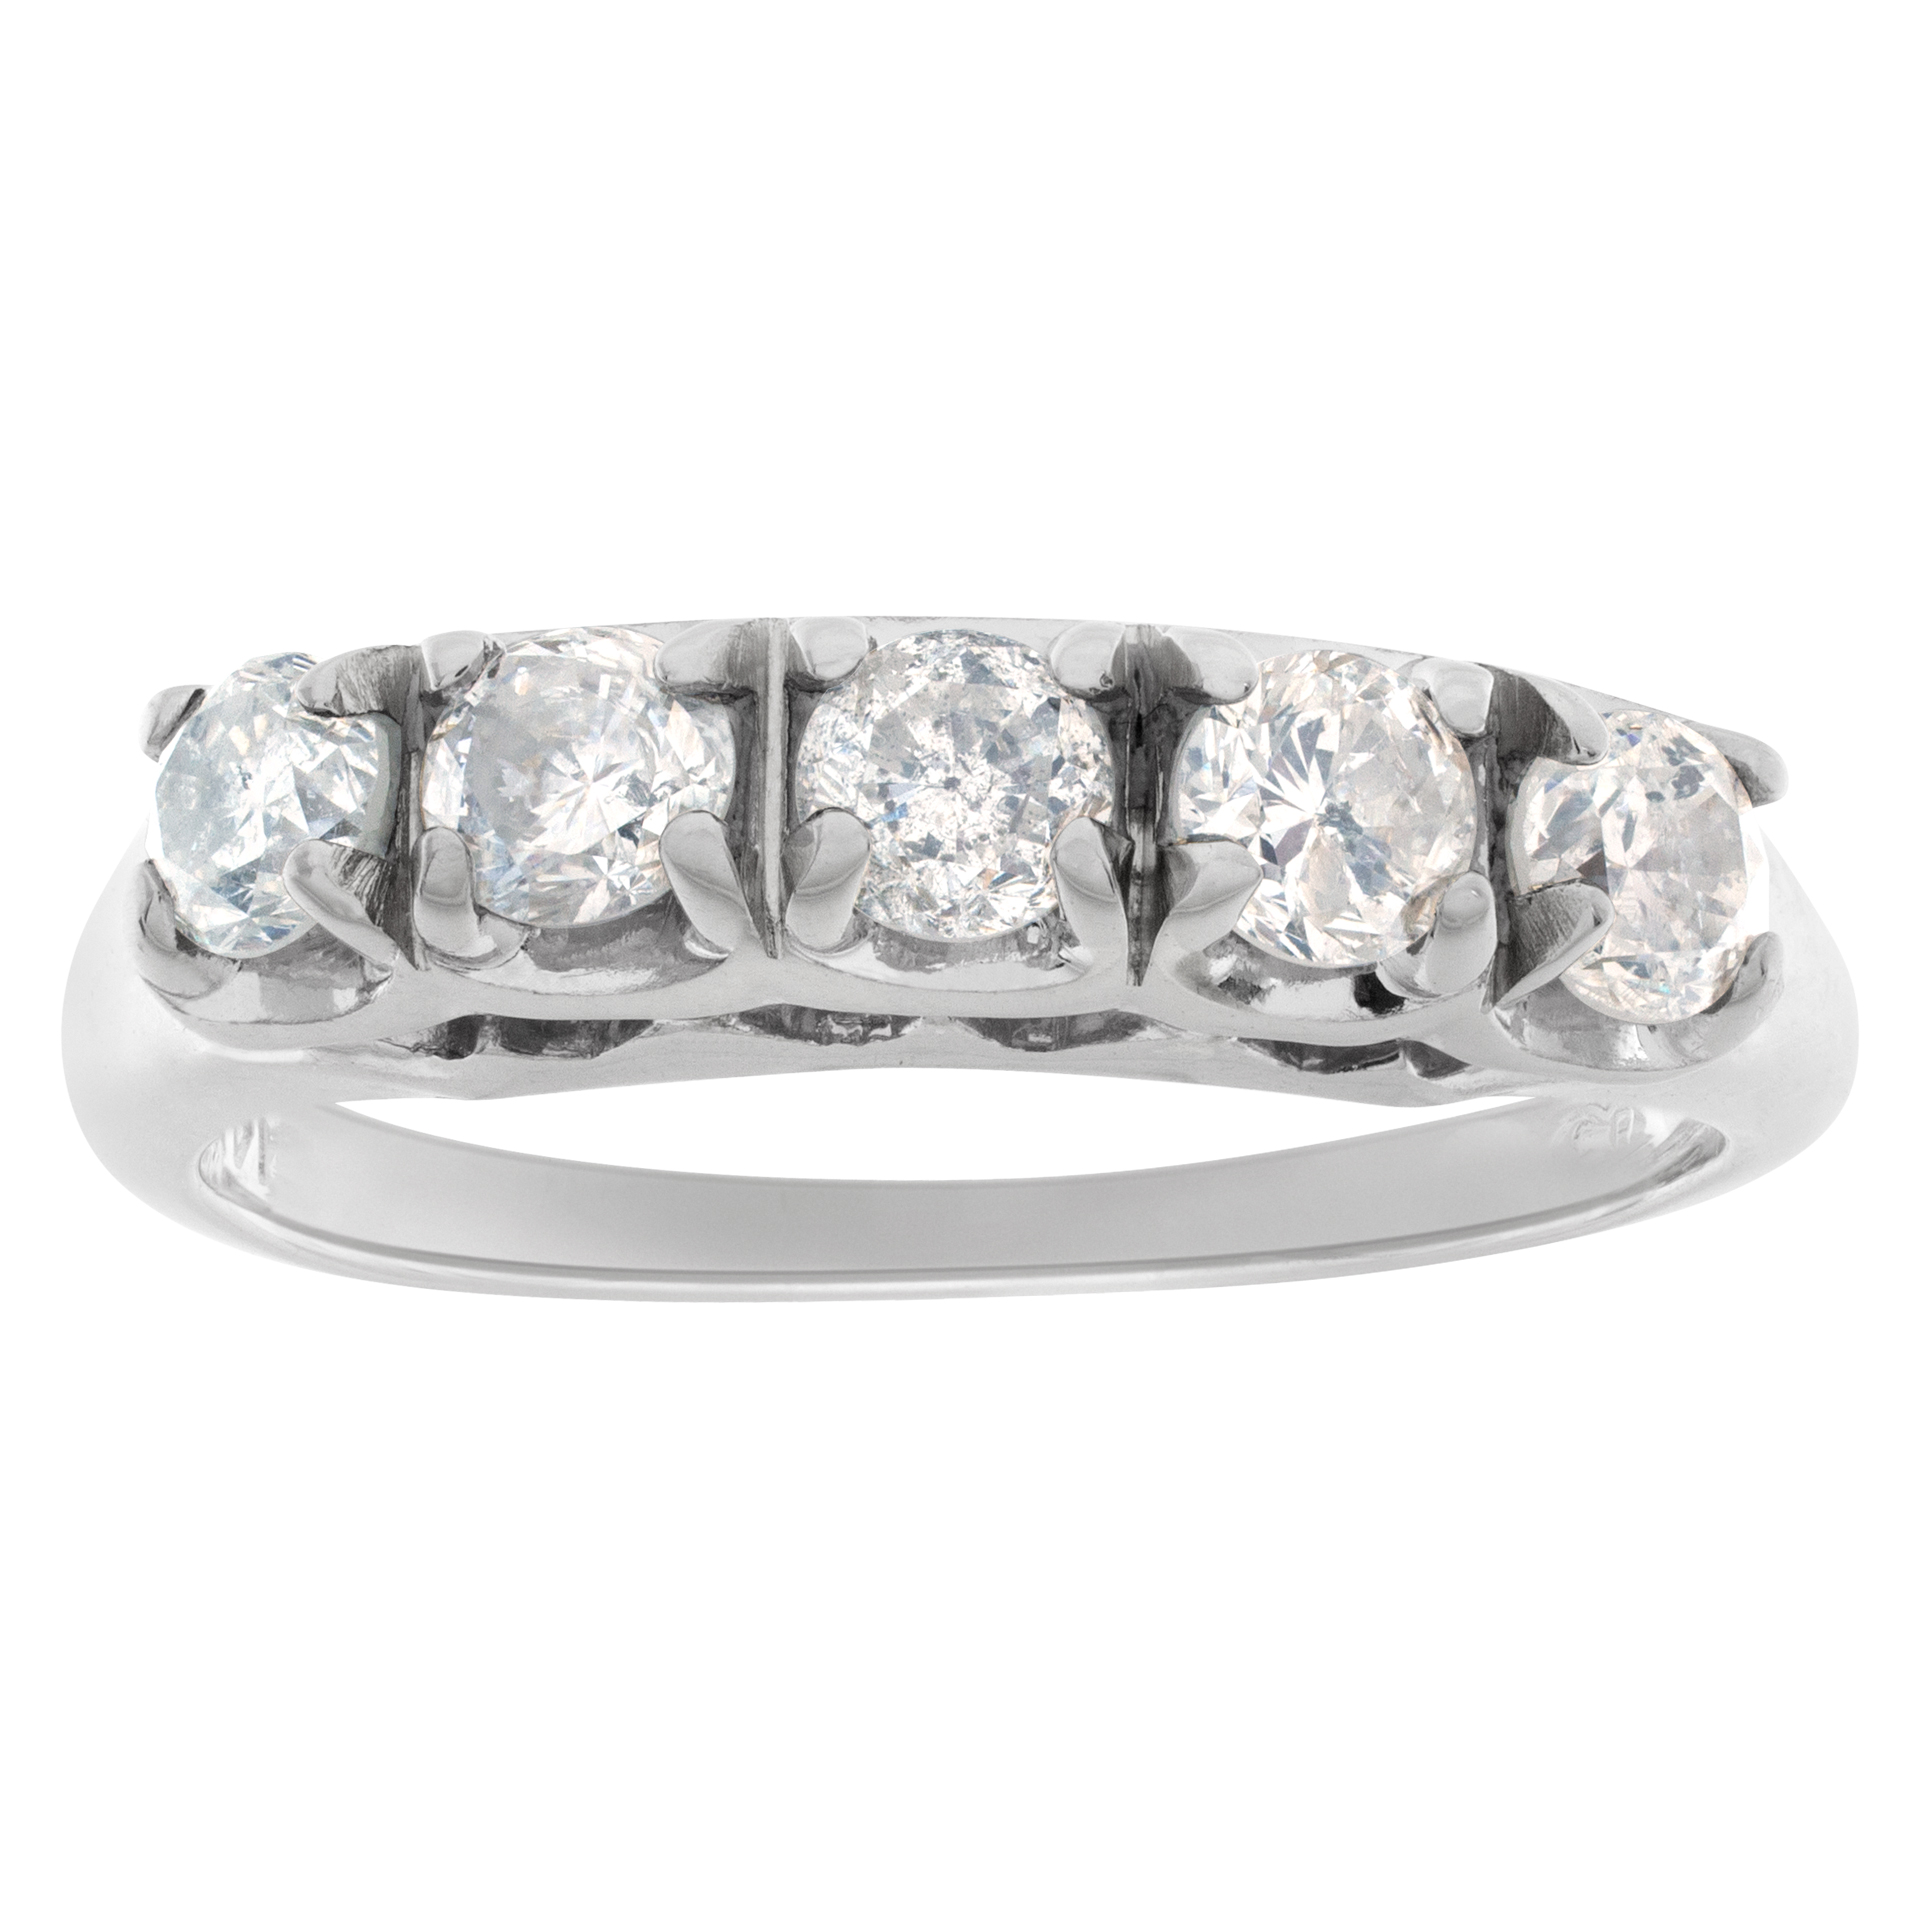 Diamond band in 14k white gold. 1.00 carats in diamond. Size 6.75 image 1